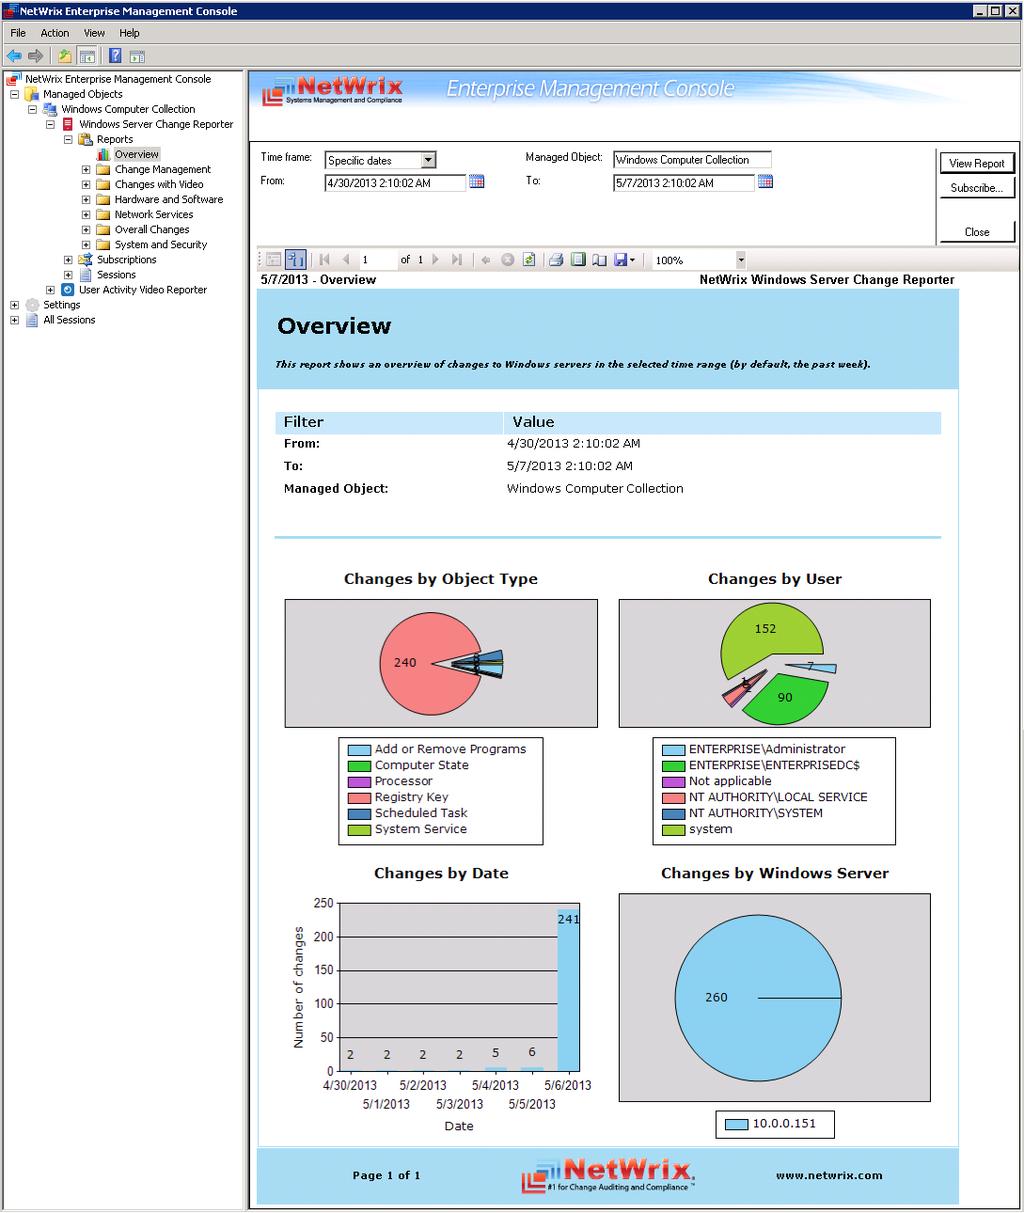 6.5. Overview Report Netwrix Windows Server Change Reporter provides a visual representation of all changes to the monitored computers in the Overview report.